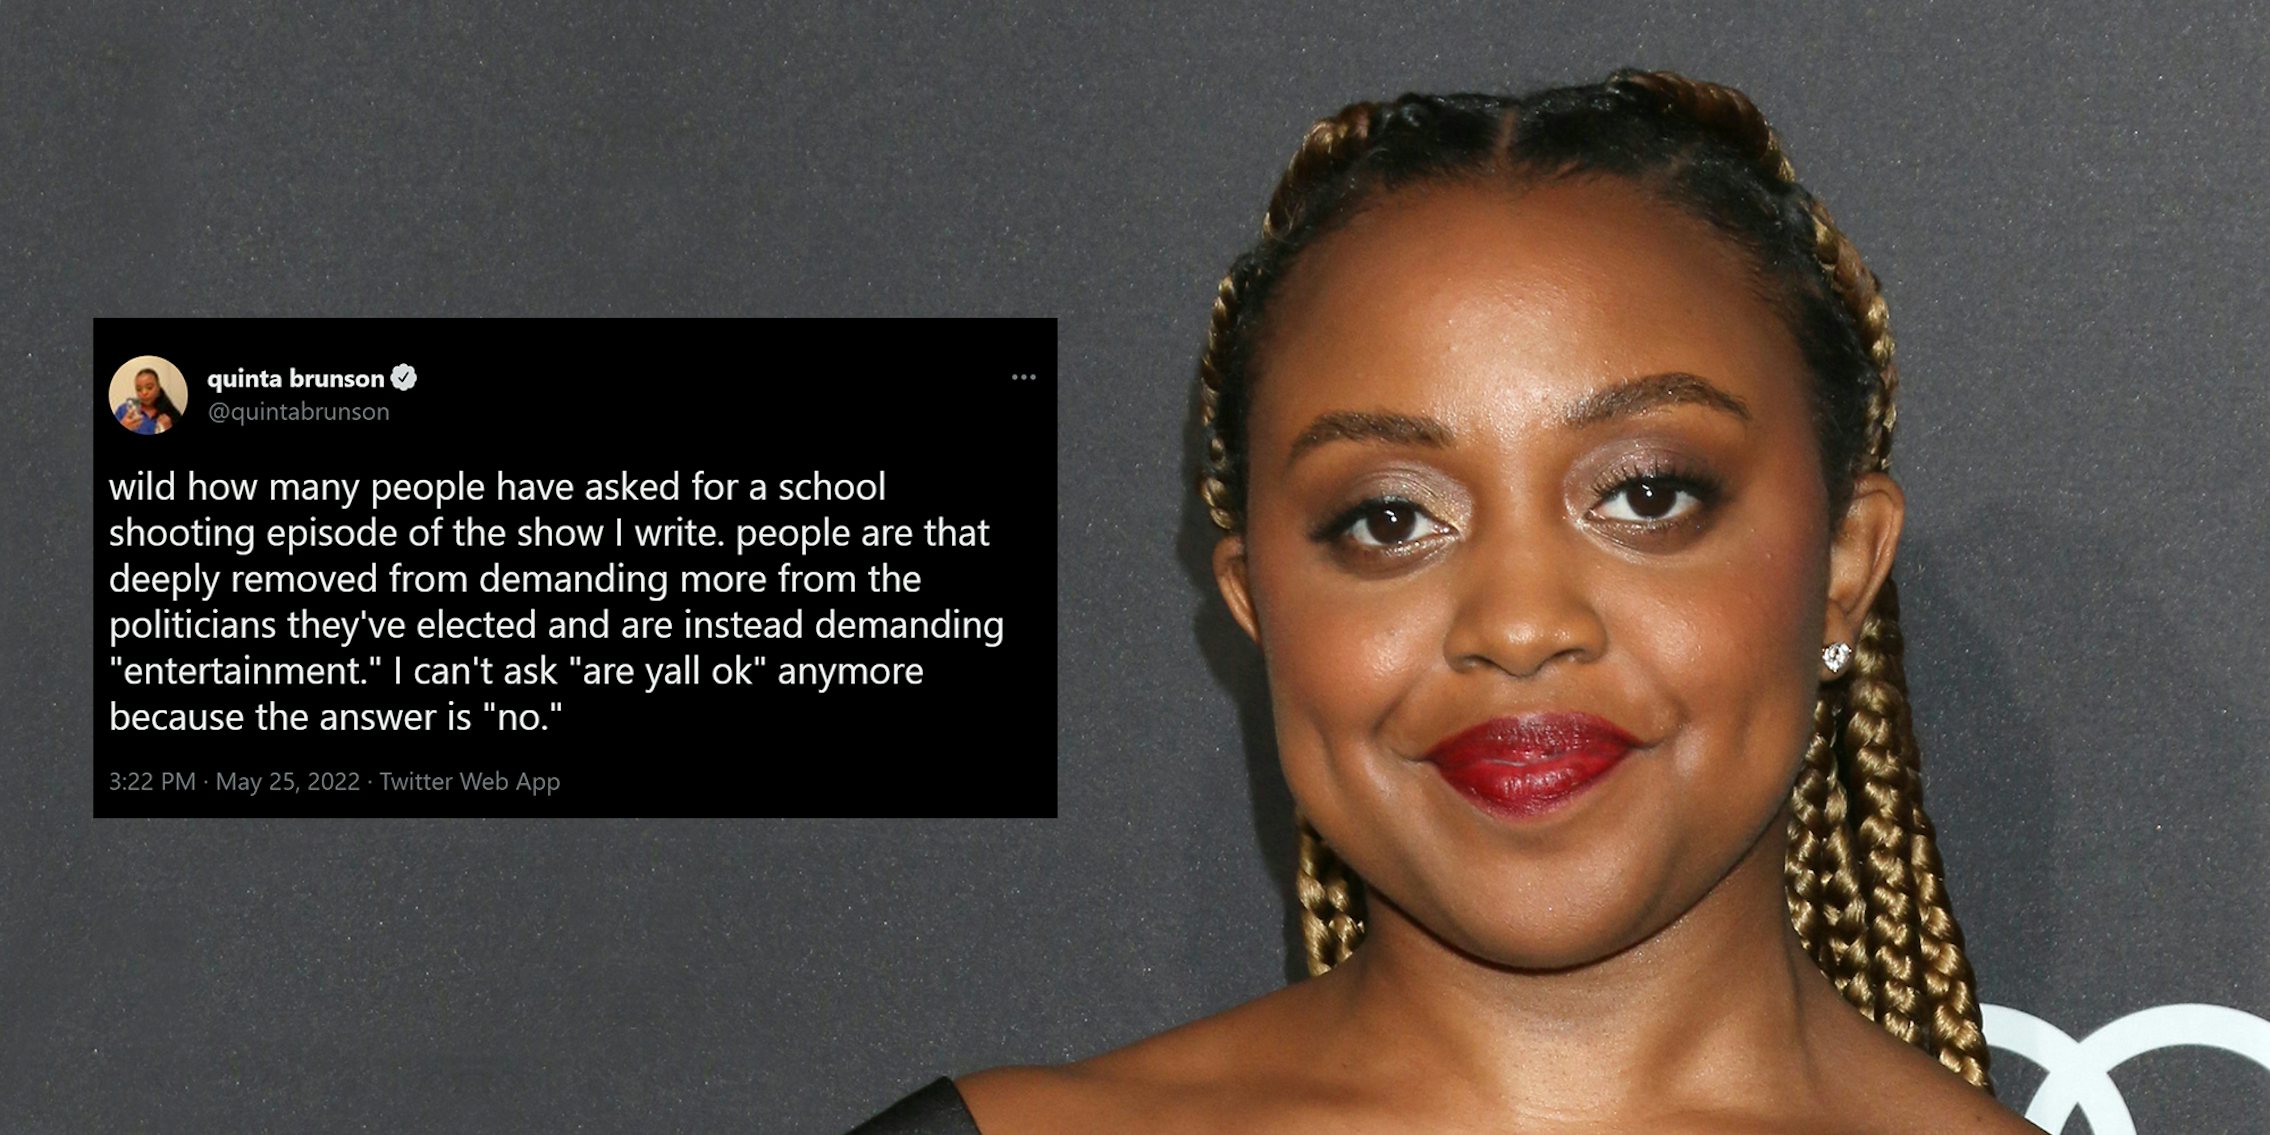 Quinta Brunson with tweet inset 'wild how many people have asked for a school shooting episode of the show I write. people are that deeply removed from demanding more from the politicians they've elected and are instead demanding 'entertainment.' I can't ask 'are yall ok' anymore because the answer is 'no'.'